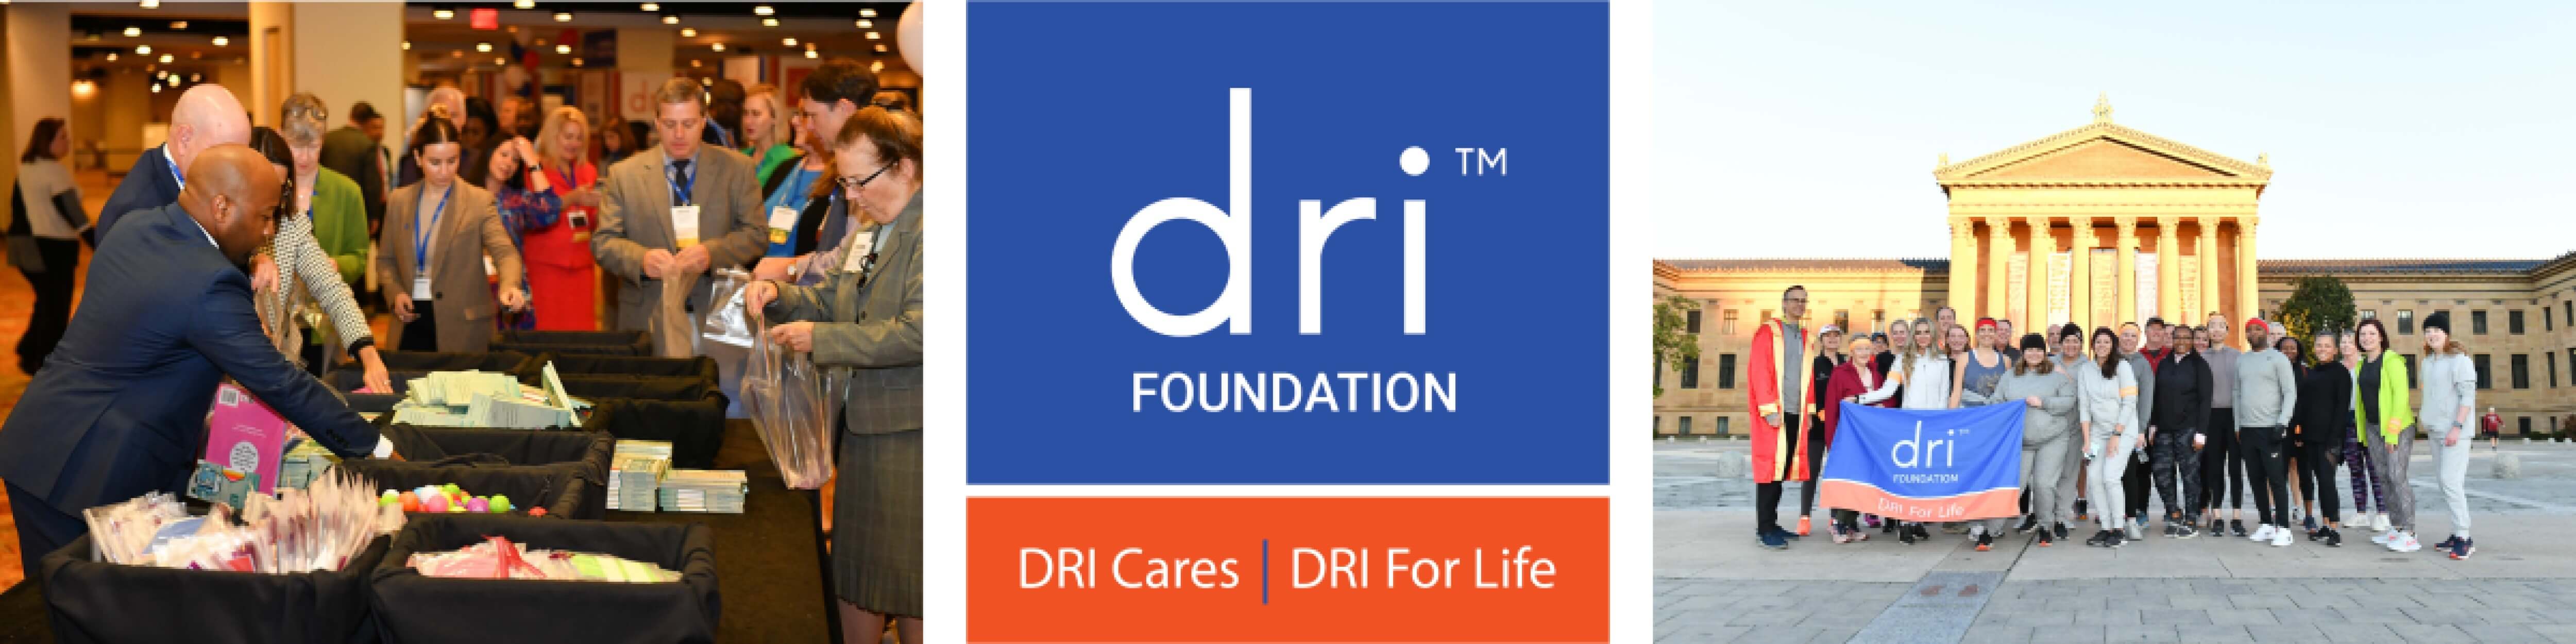 DRI Foundation, DRI Cares, DRI for Life, donating giving to others